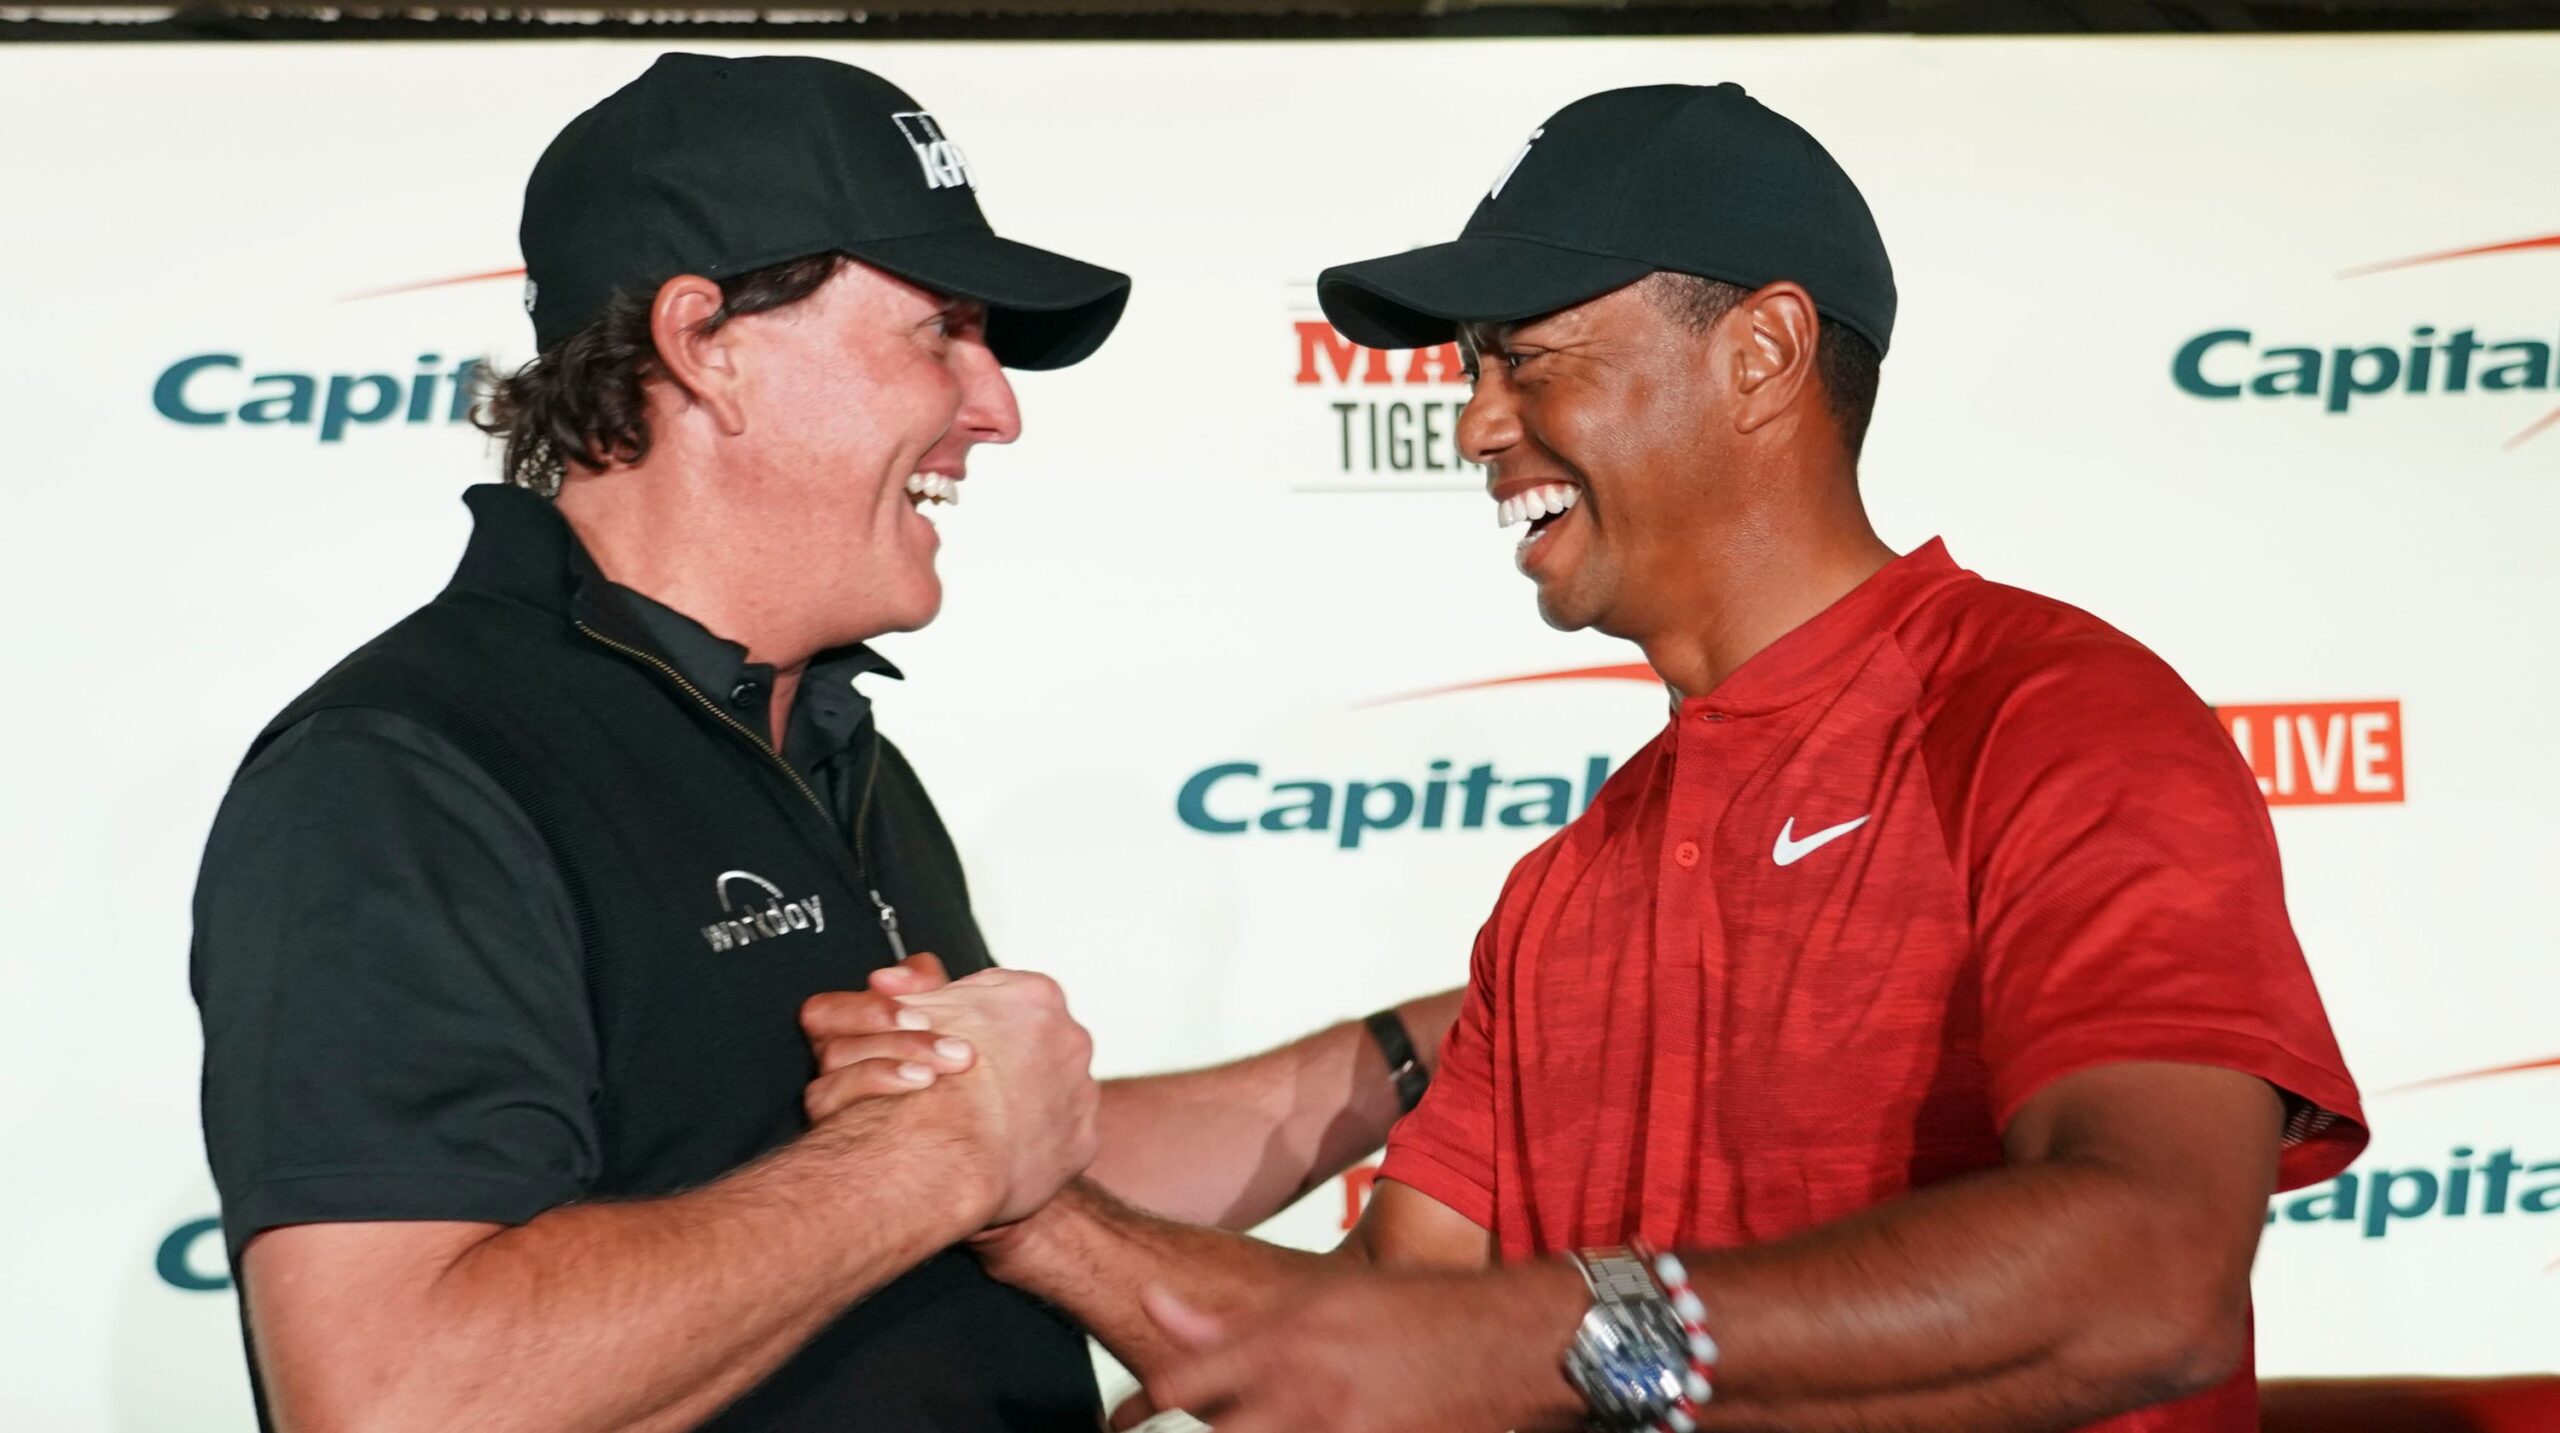 Tiger Woods Versus Phil Mickelson $9 Million Golf Match Betting Odds and Preview